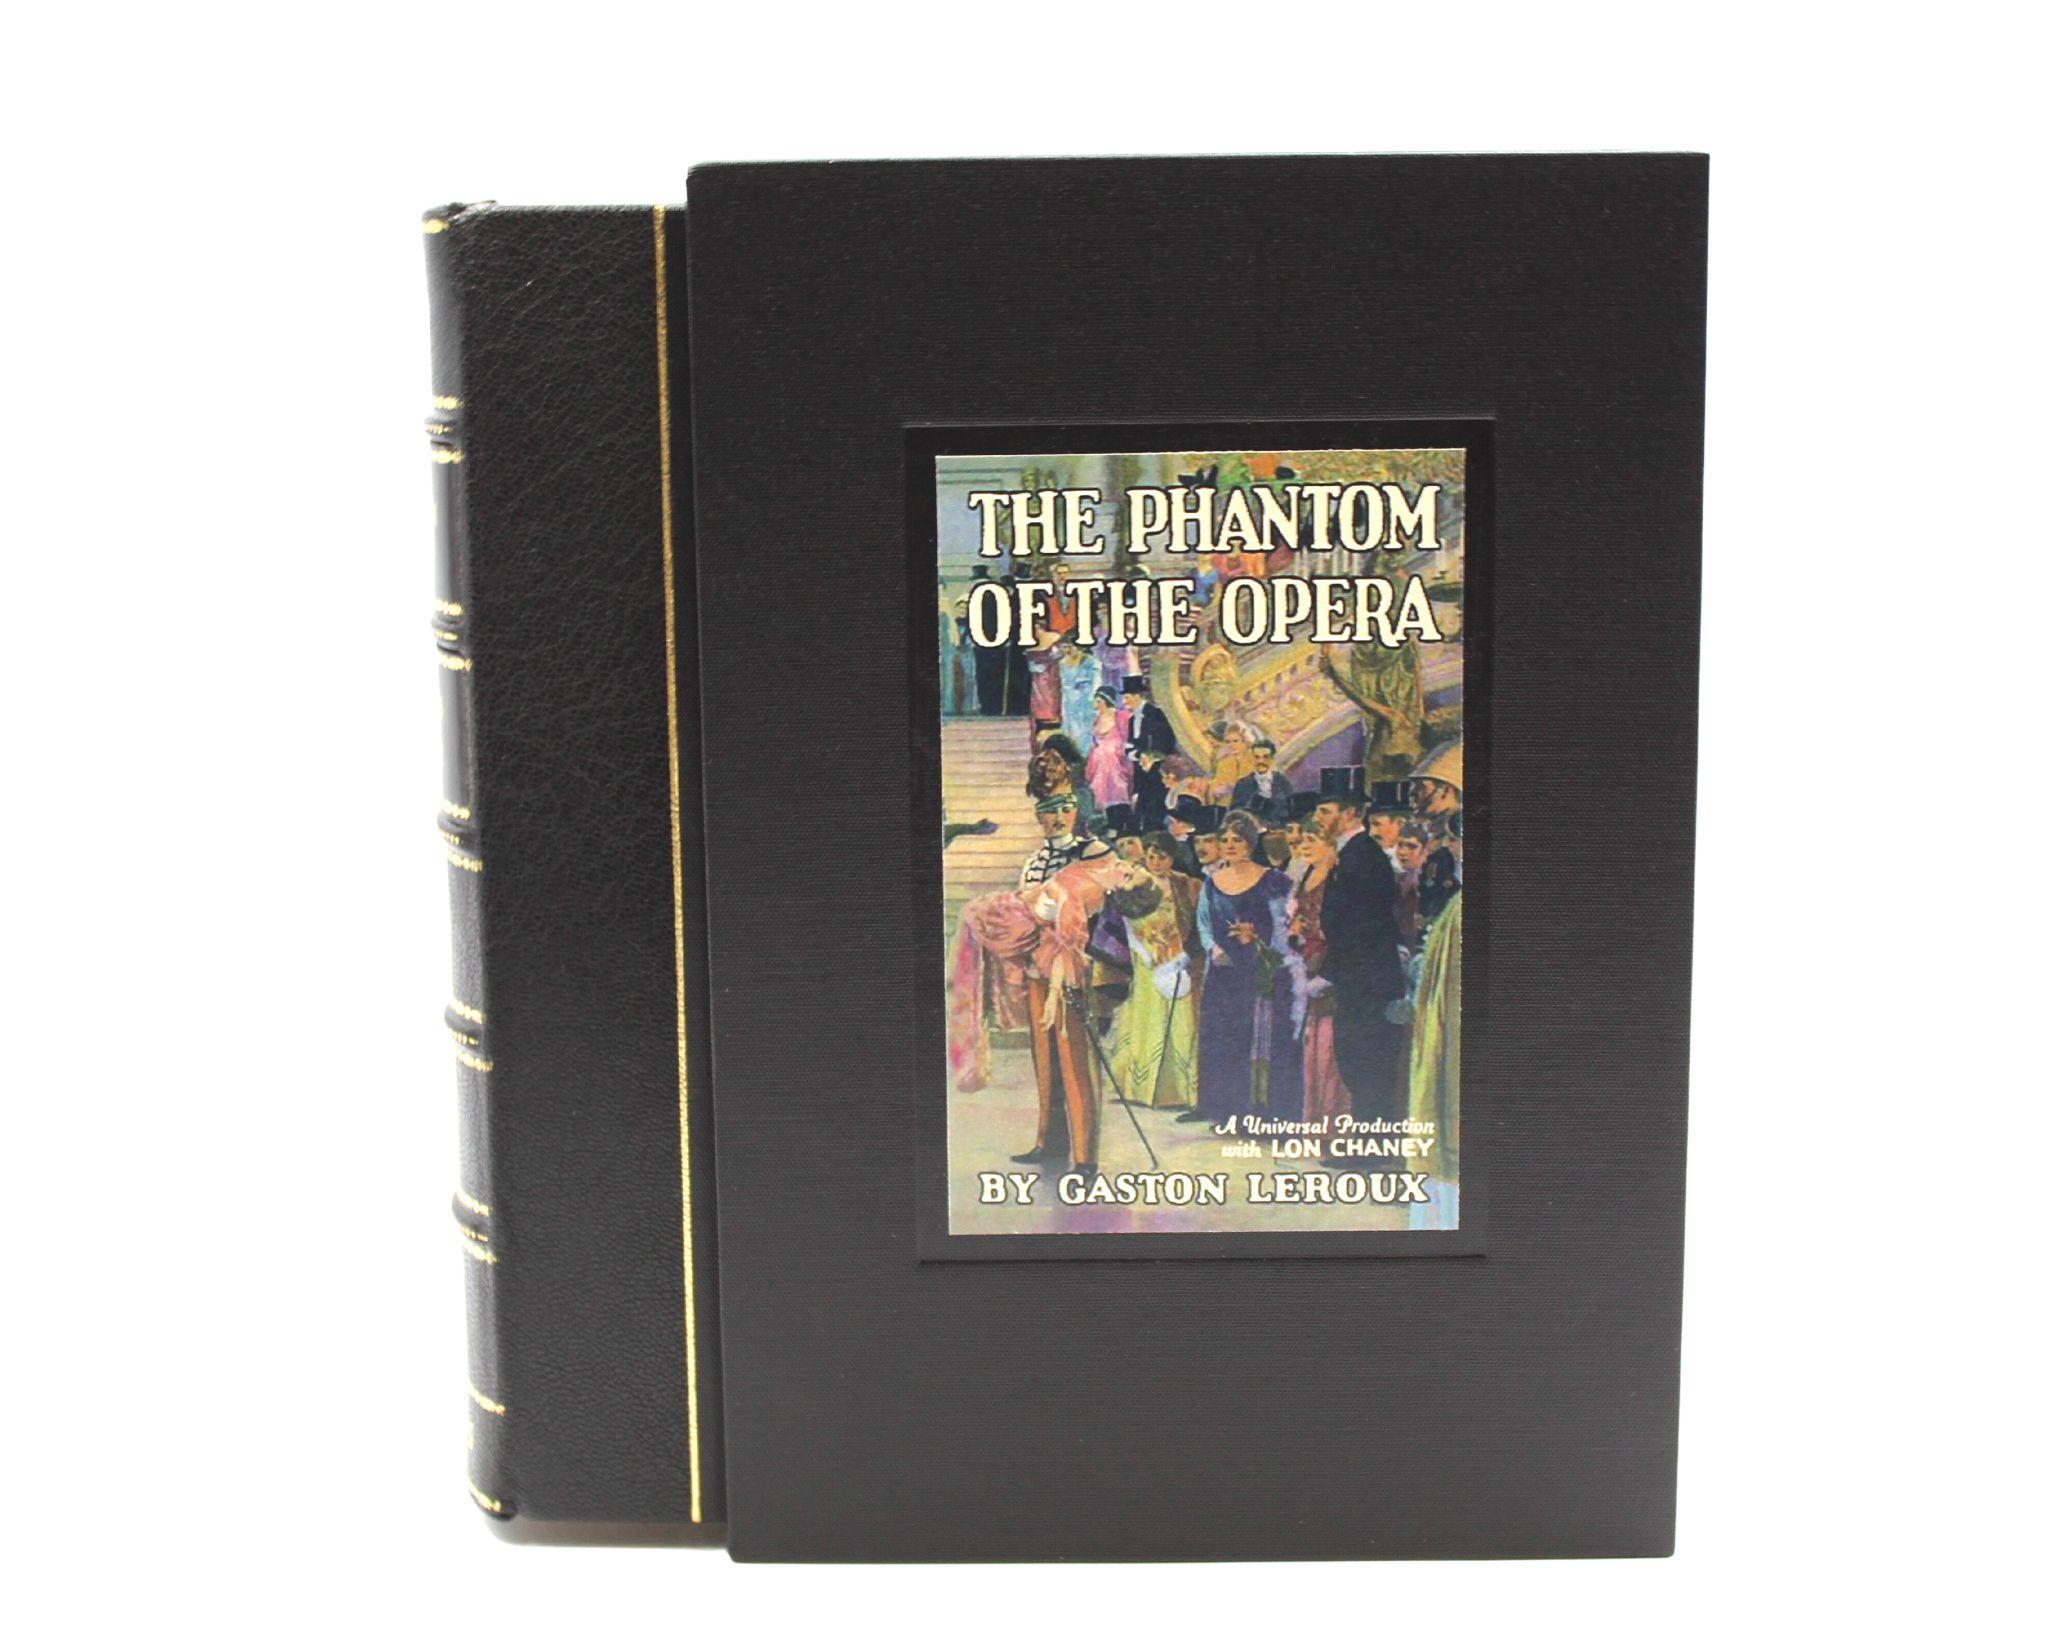 American The Phantom of the Opera by Gaston Leroux, Signed by Carla Laemmle, Photoplay For Sale